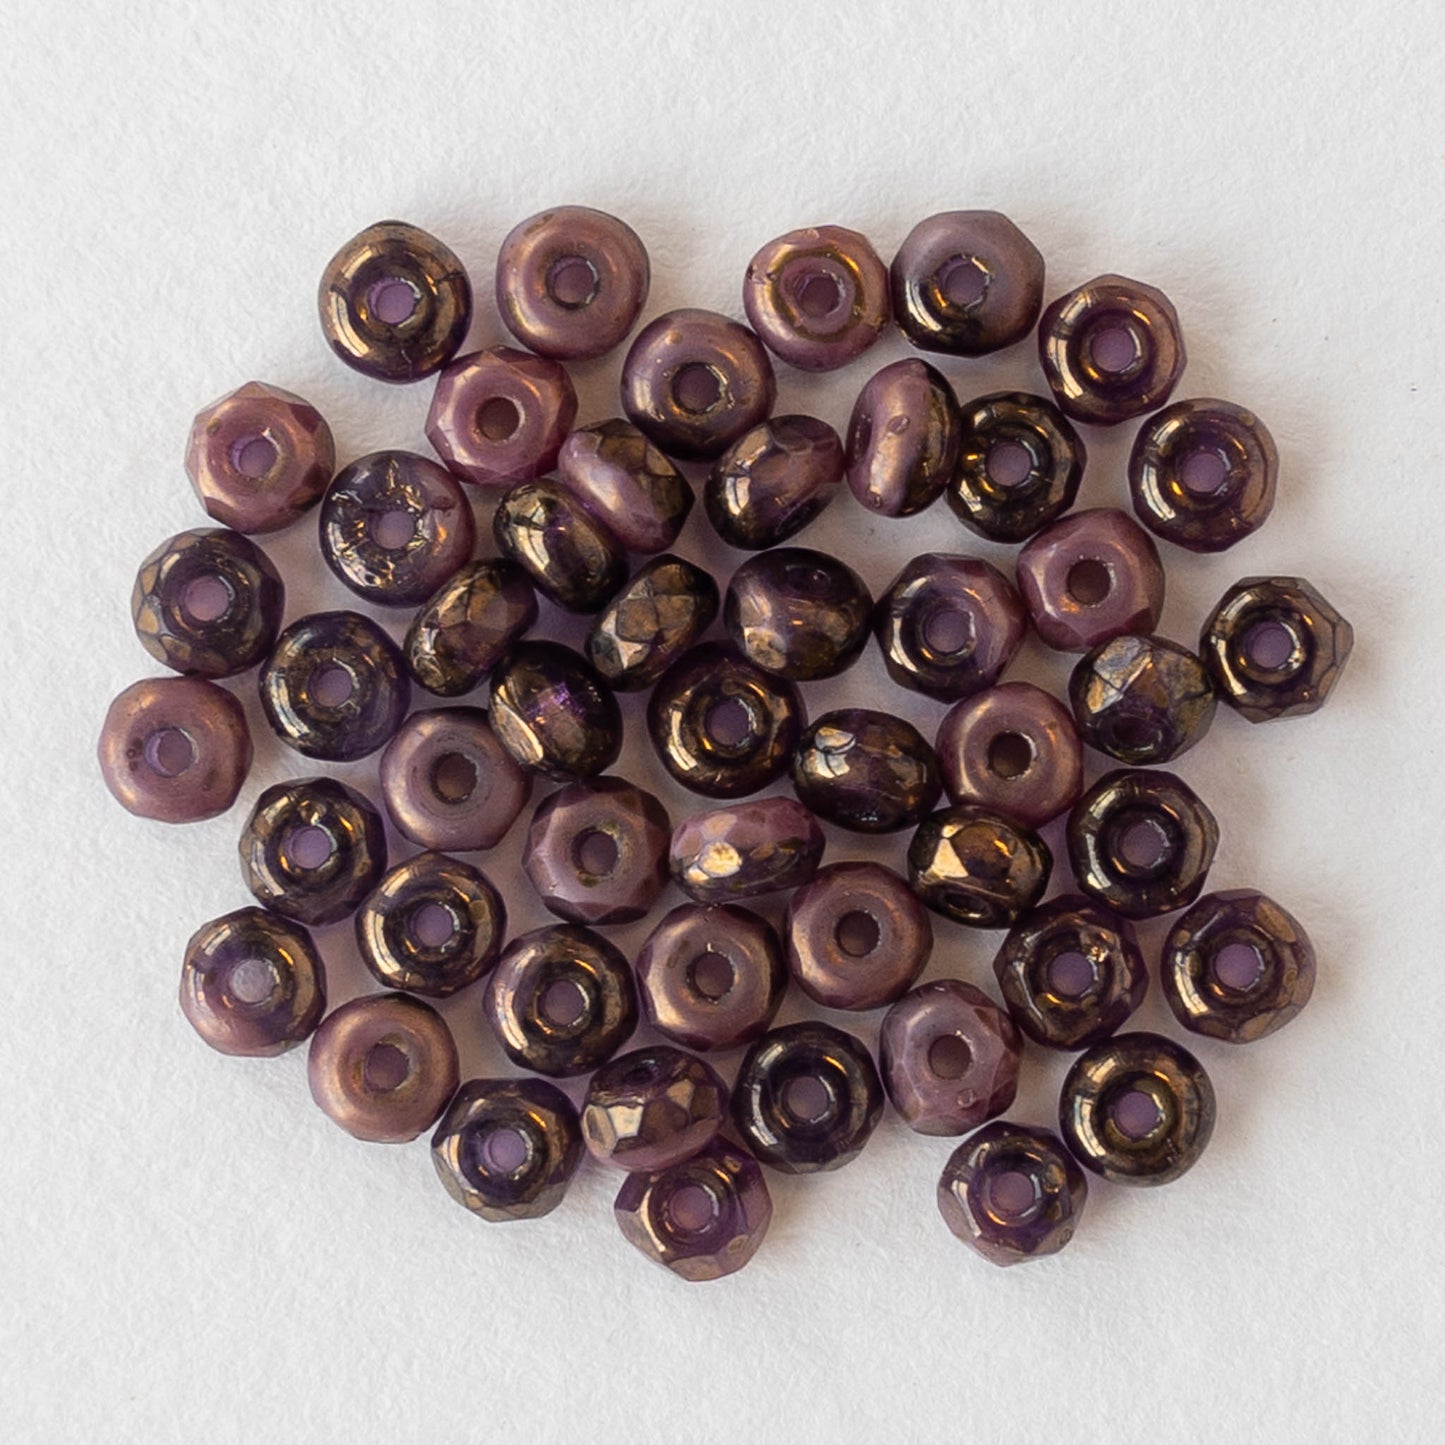 3x2mm Rondelle Beads - Tanzanite Purple and Pink Opaque Mix with Bronze - 50